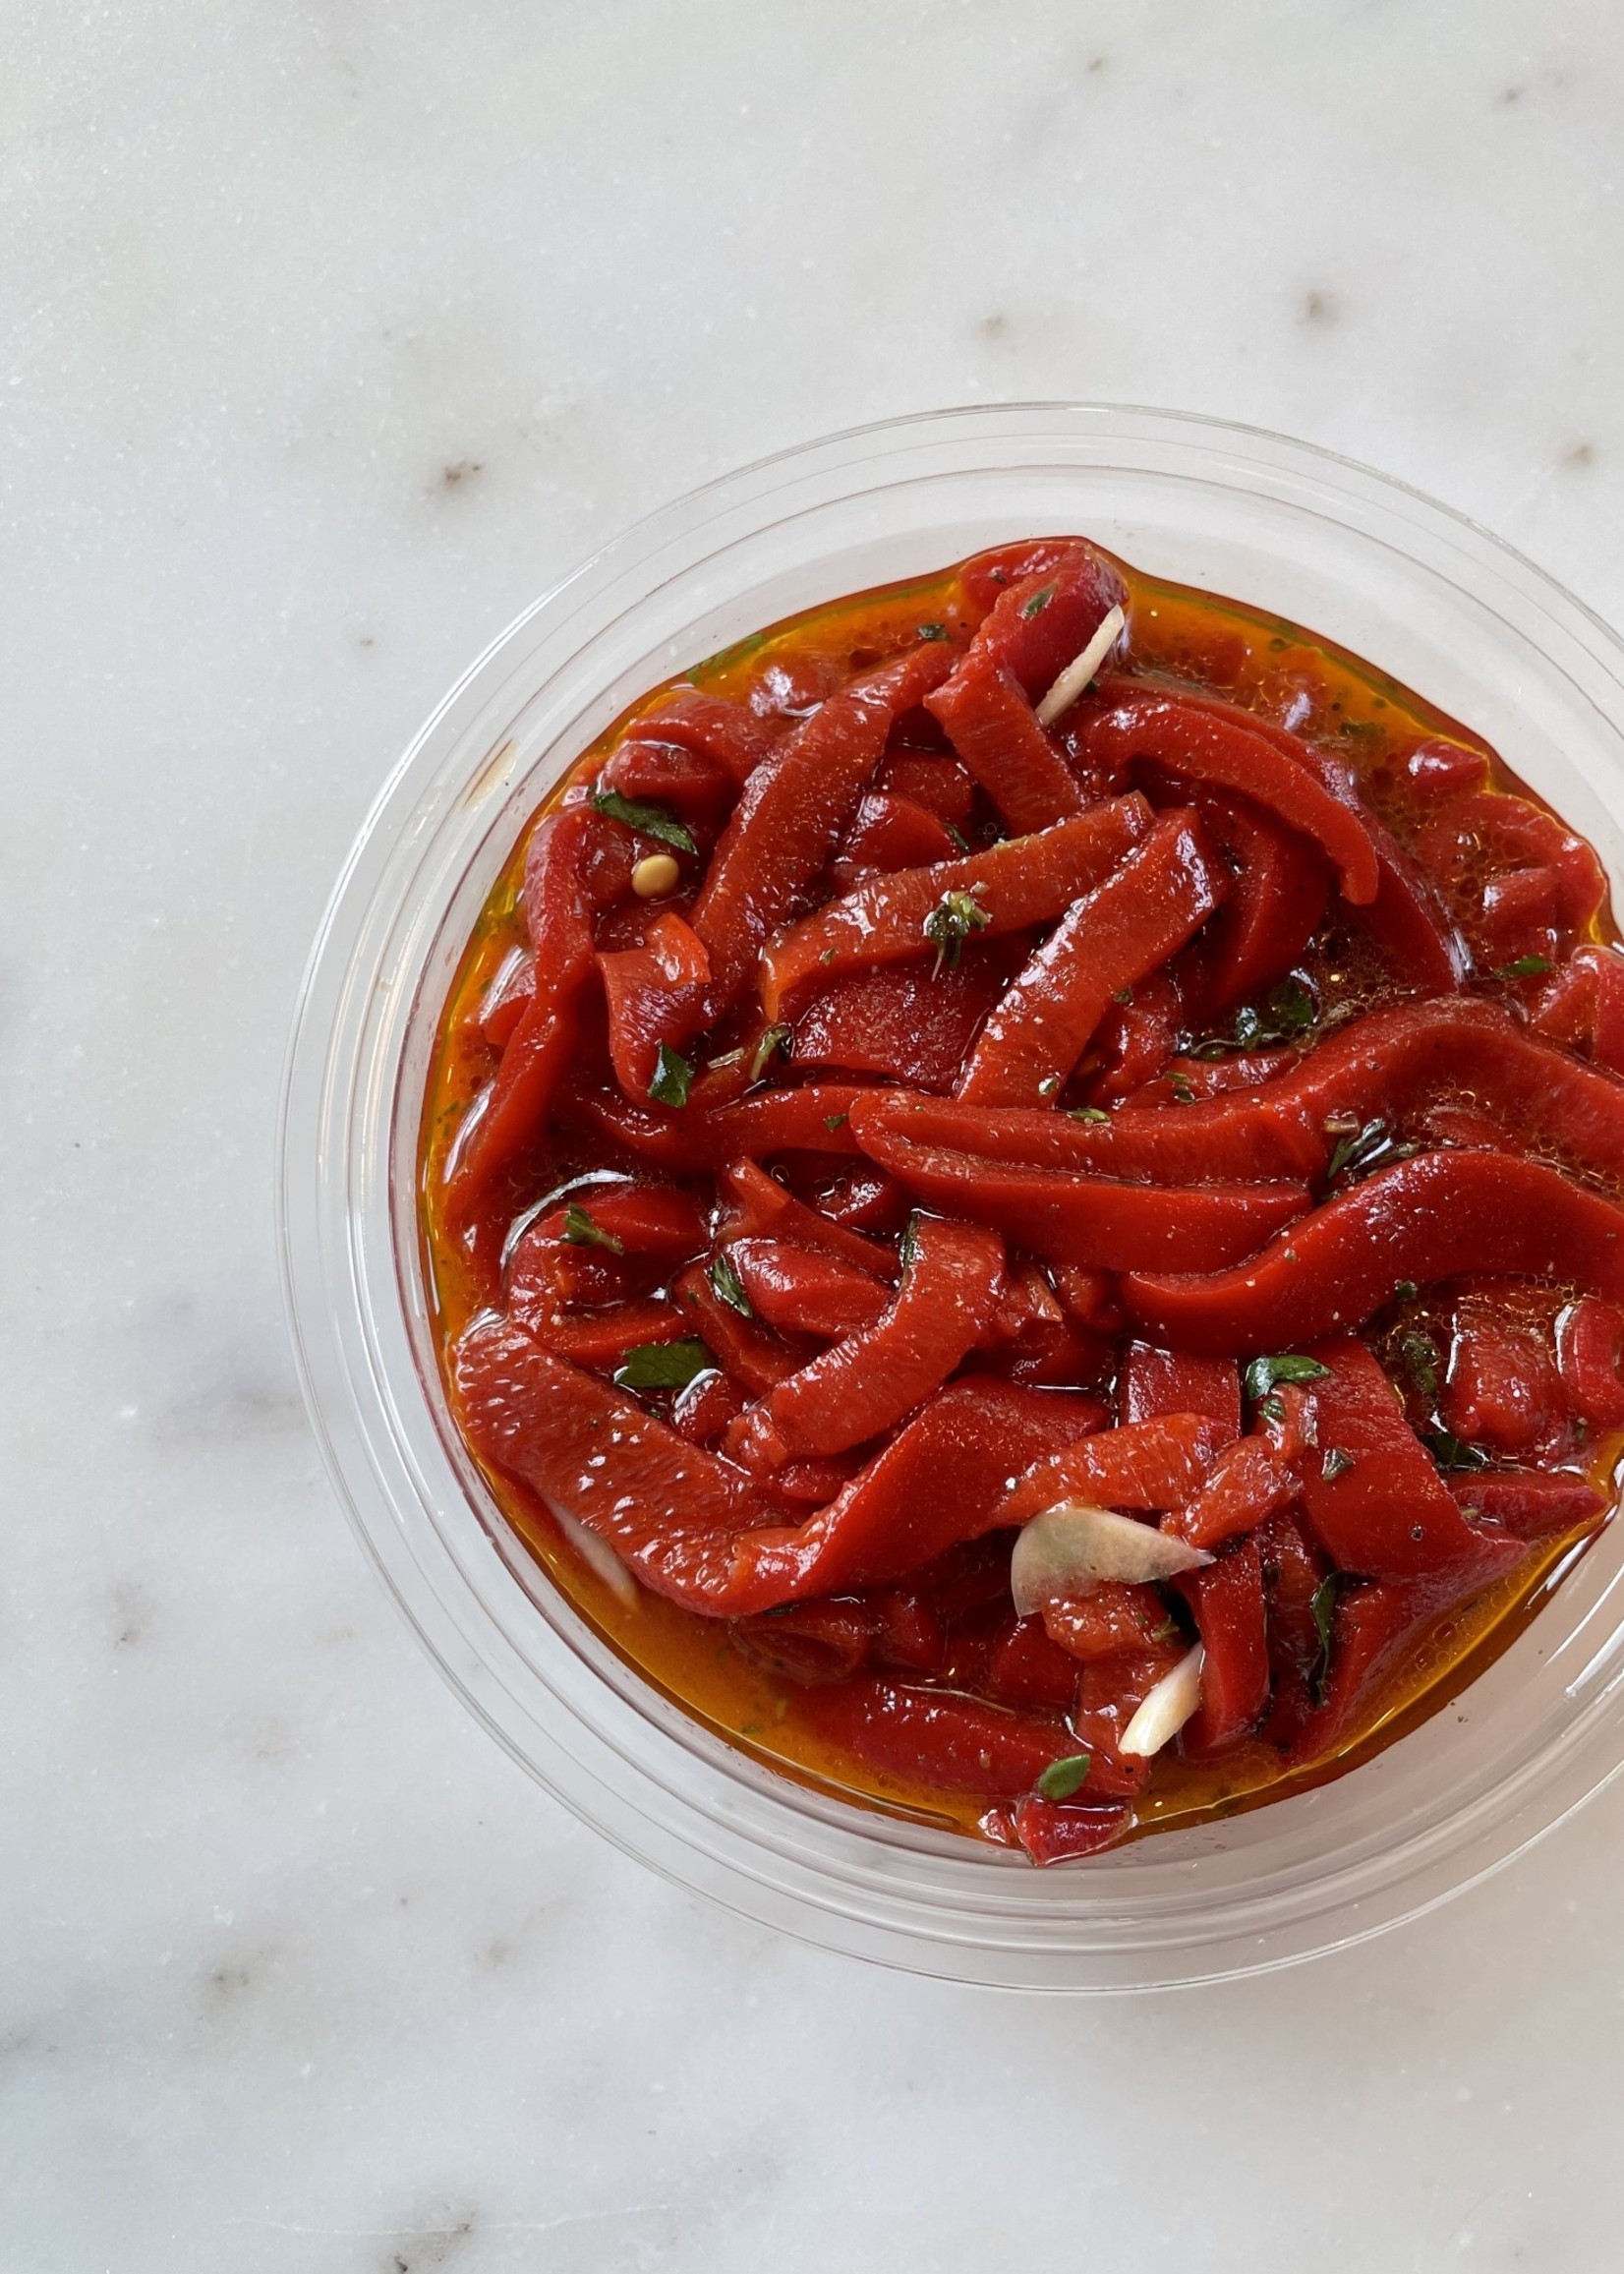 Marinated Piquillo Peppers